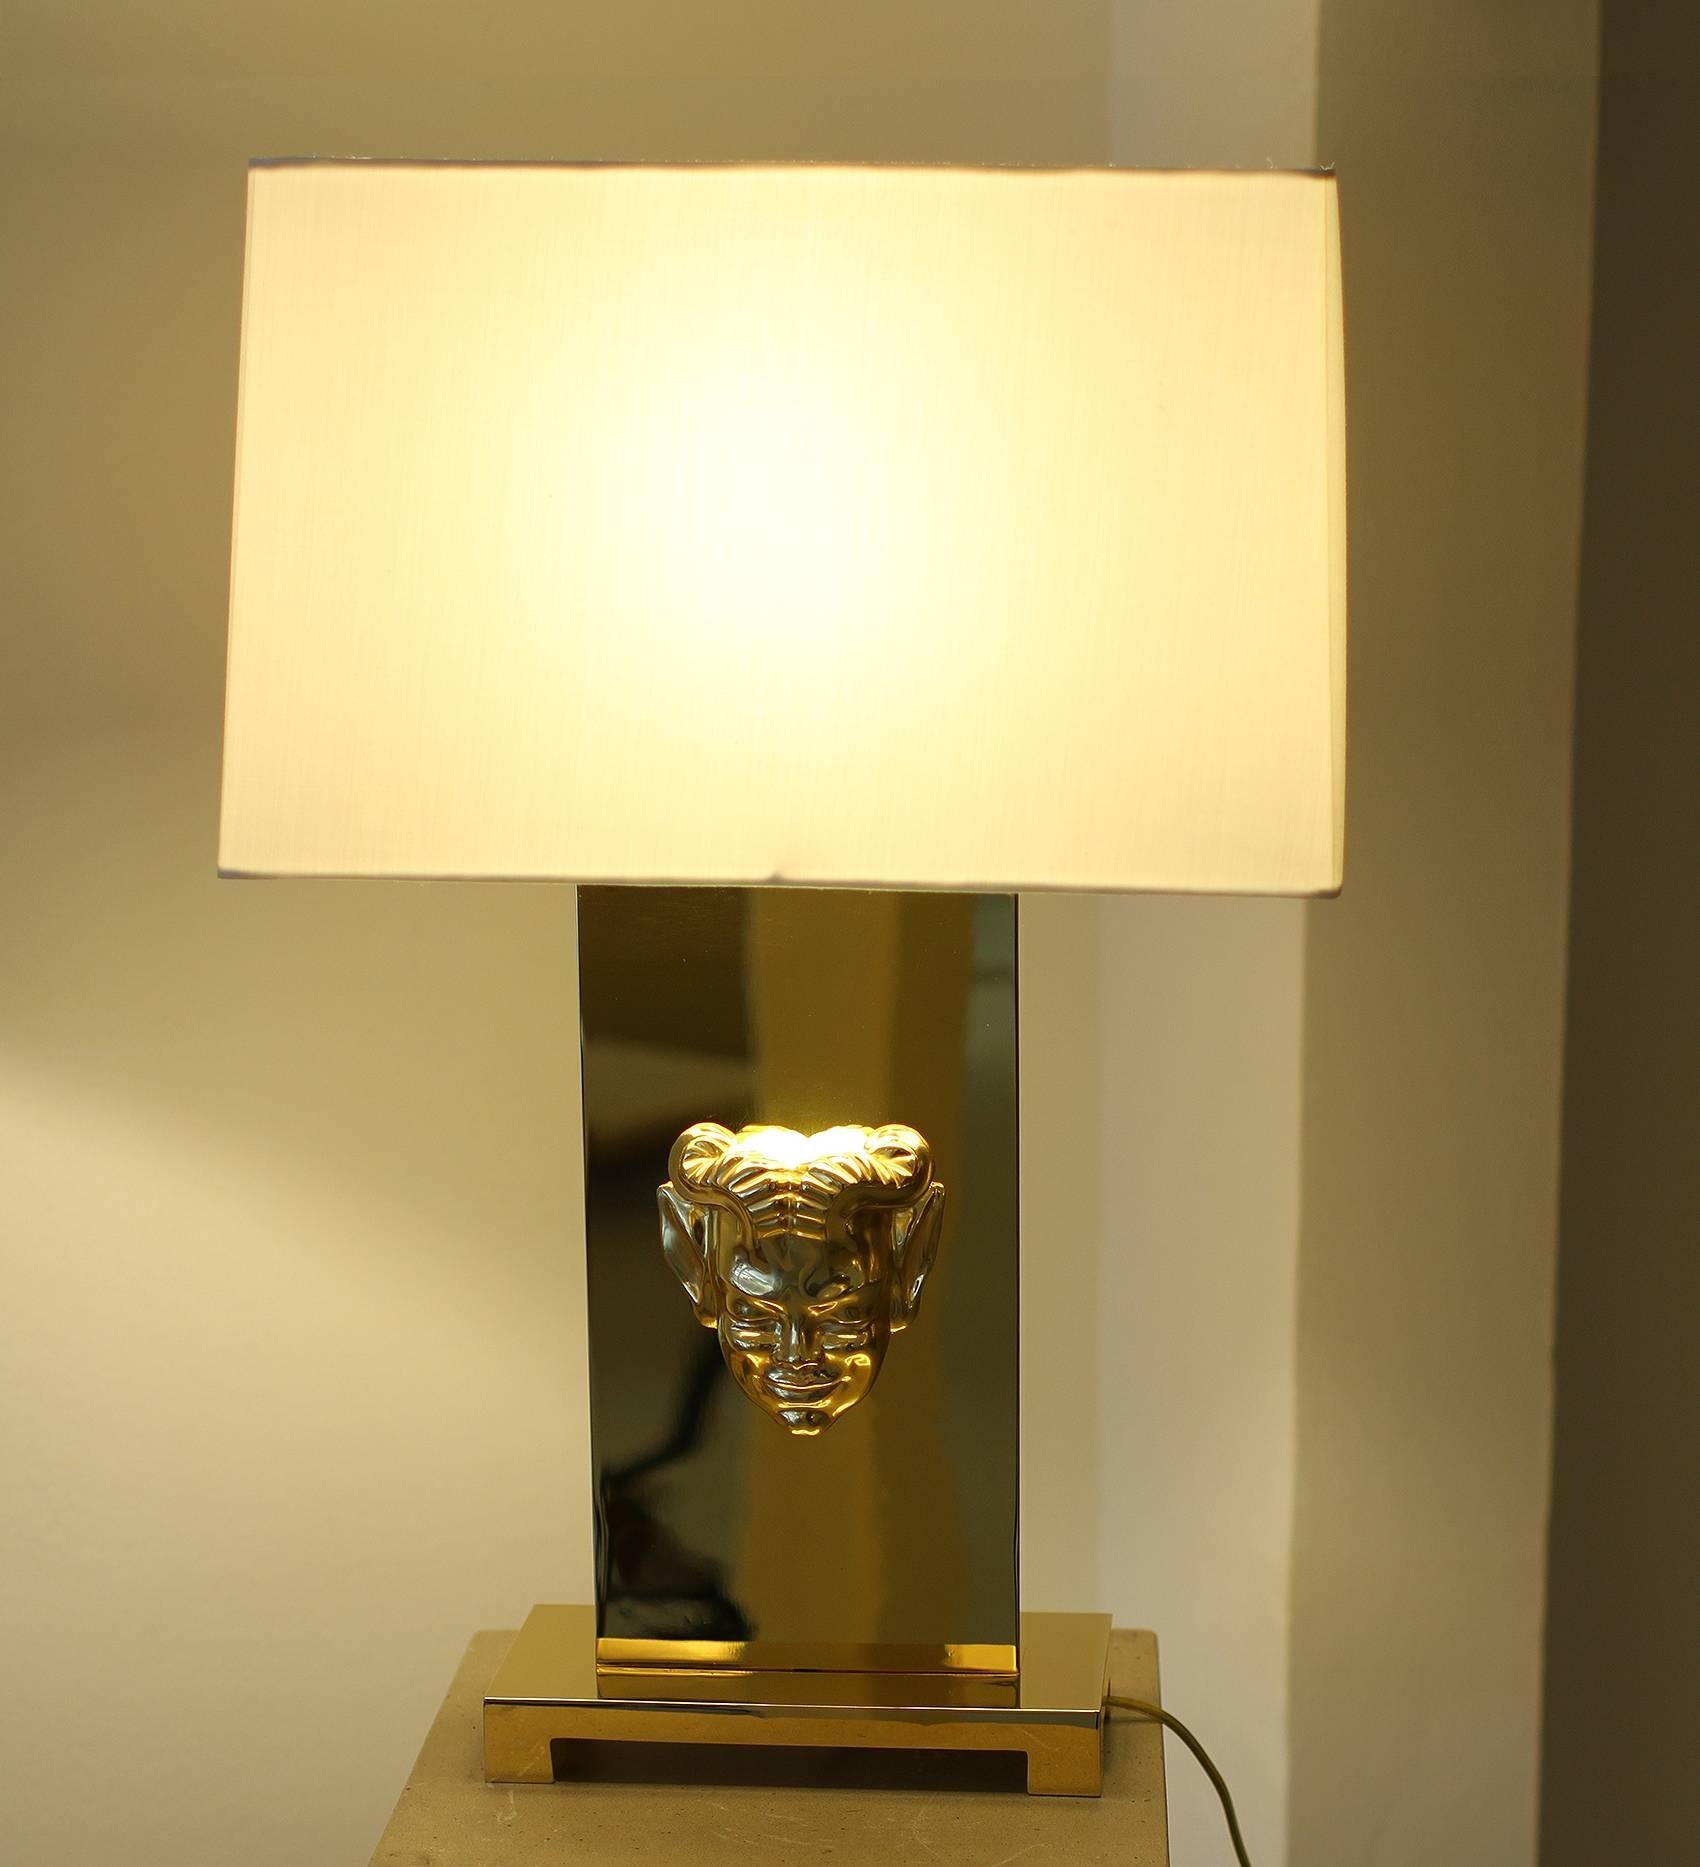 Pair of gilt bronze table lamps by Philip Neri, France/USA
Amazing work of gold plating. Each lamp is wired for US with a 40w or 60w light bulb diffusing the light into an ivory pongee custom lampshade. The mask also includes a low voltage light.